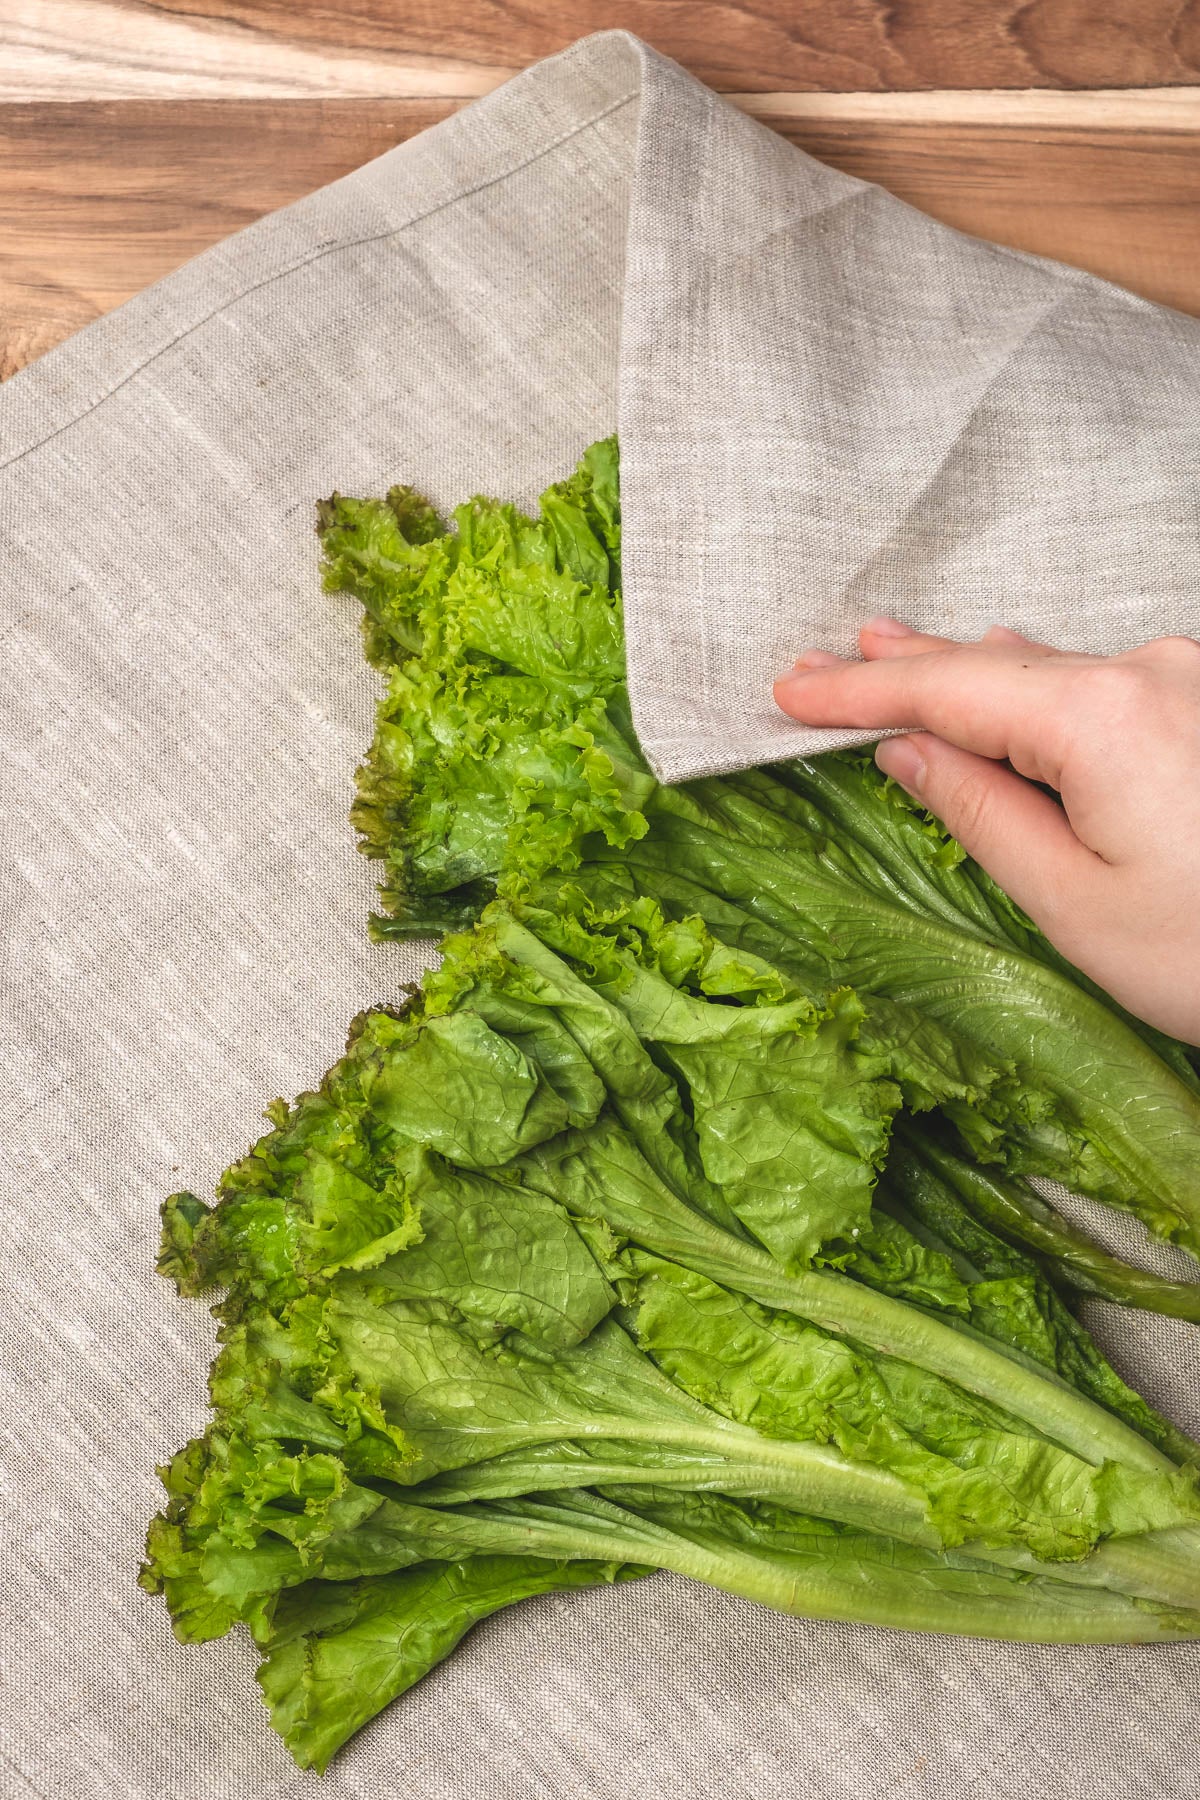 Natural linen apron used to pat lettuce greens dry